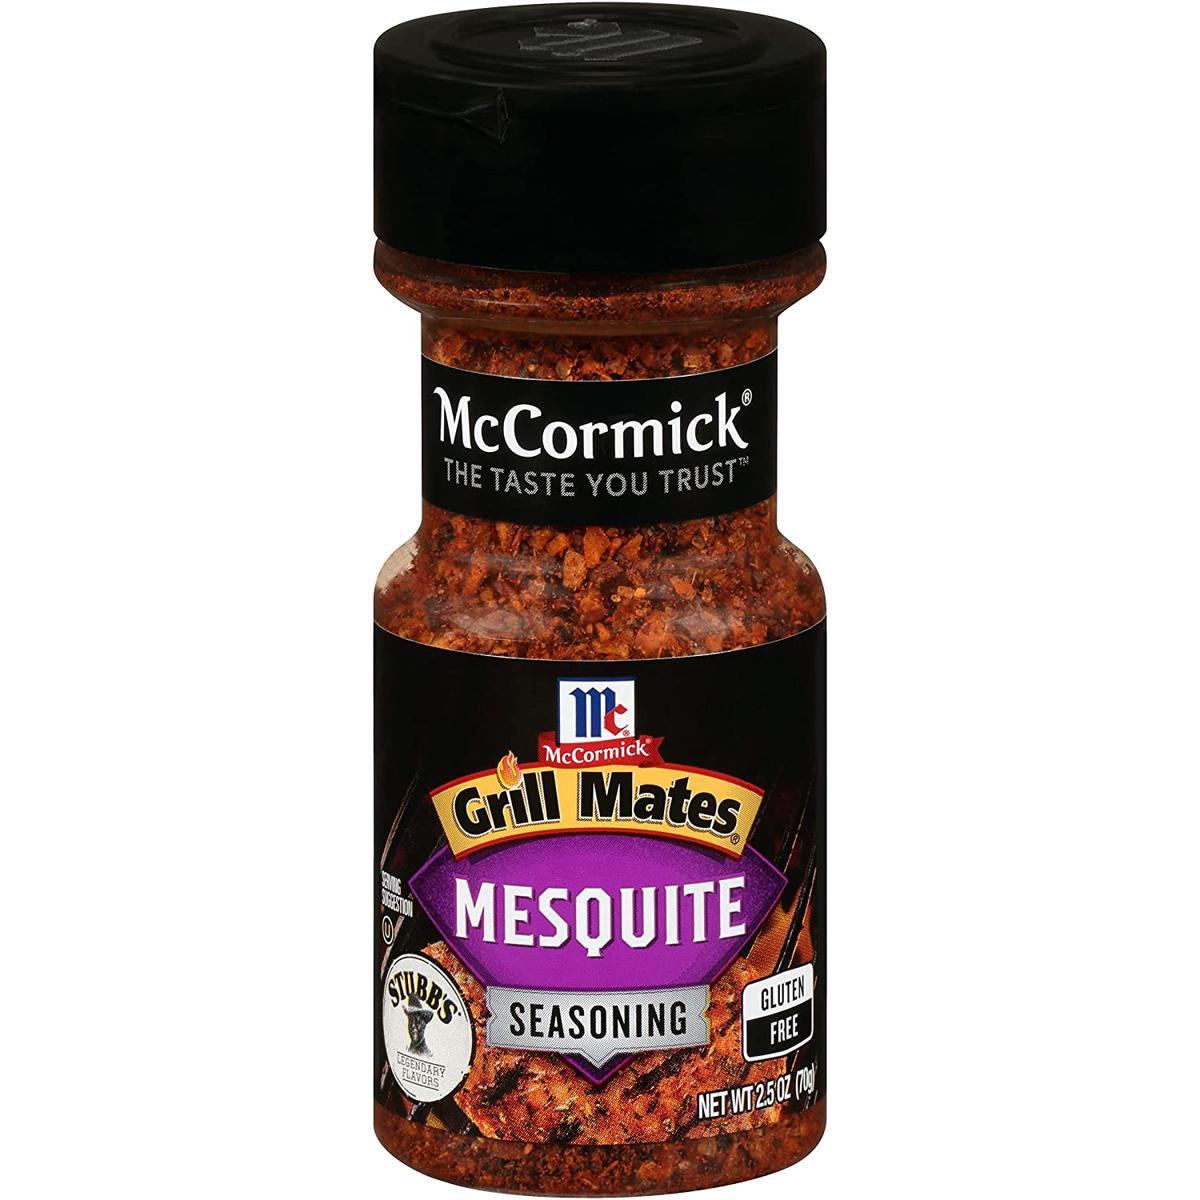 McCormick Grill Mates Mesquite Seasoning for $1.21 Shipped